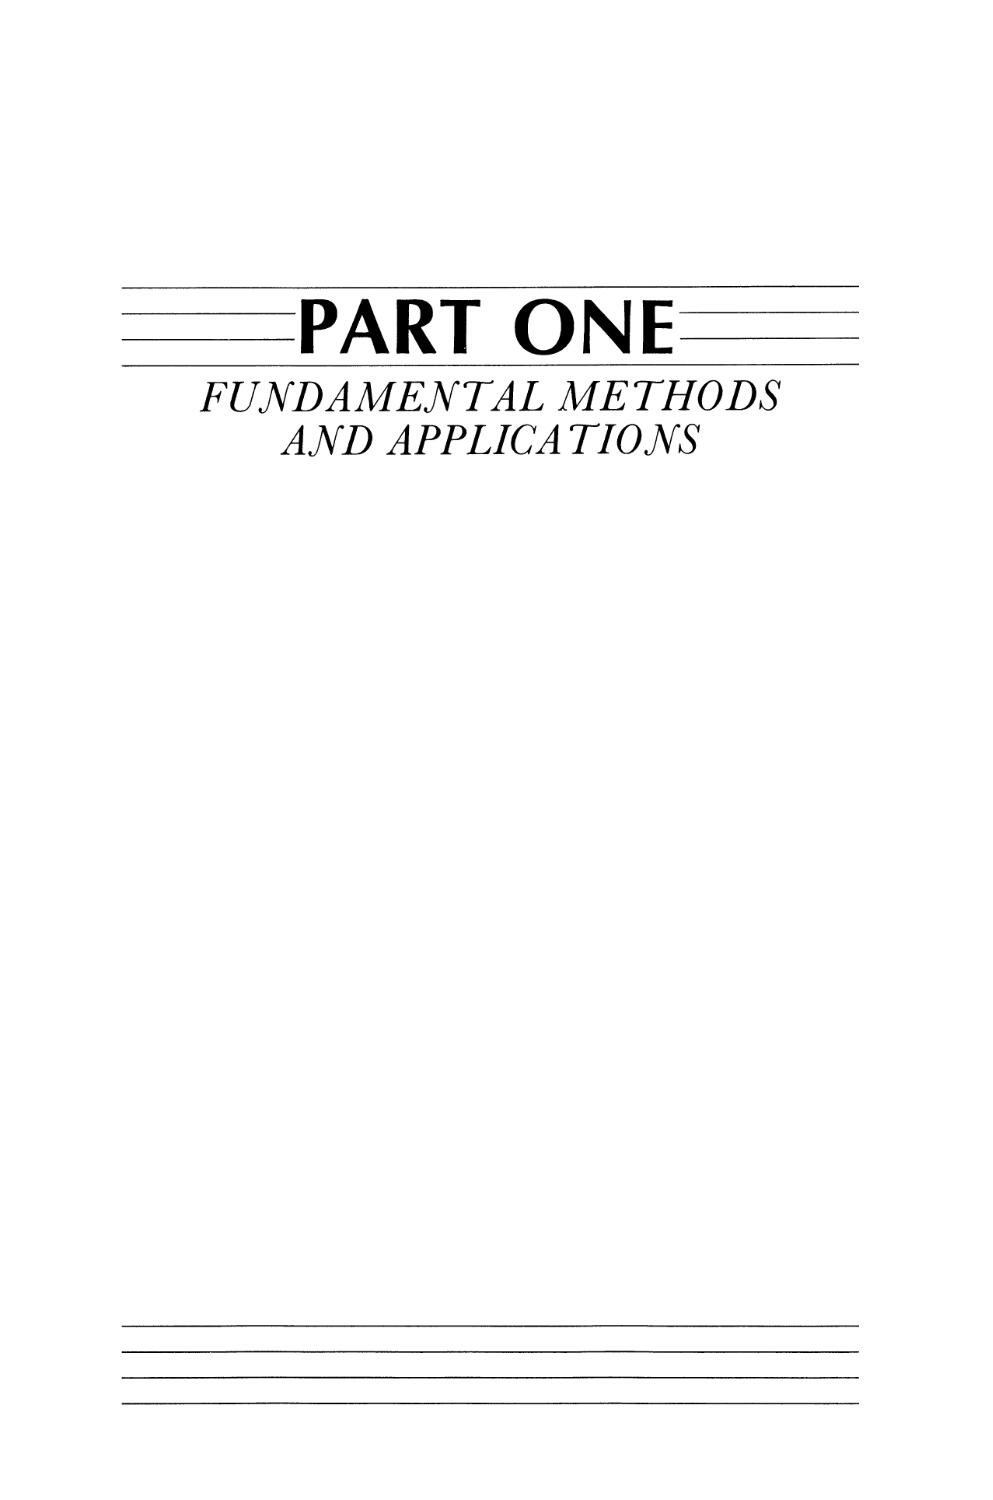 PART ONE - FUNDAMENTAL METHODS AND APPLICATIONS